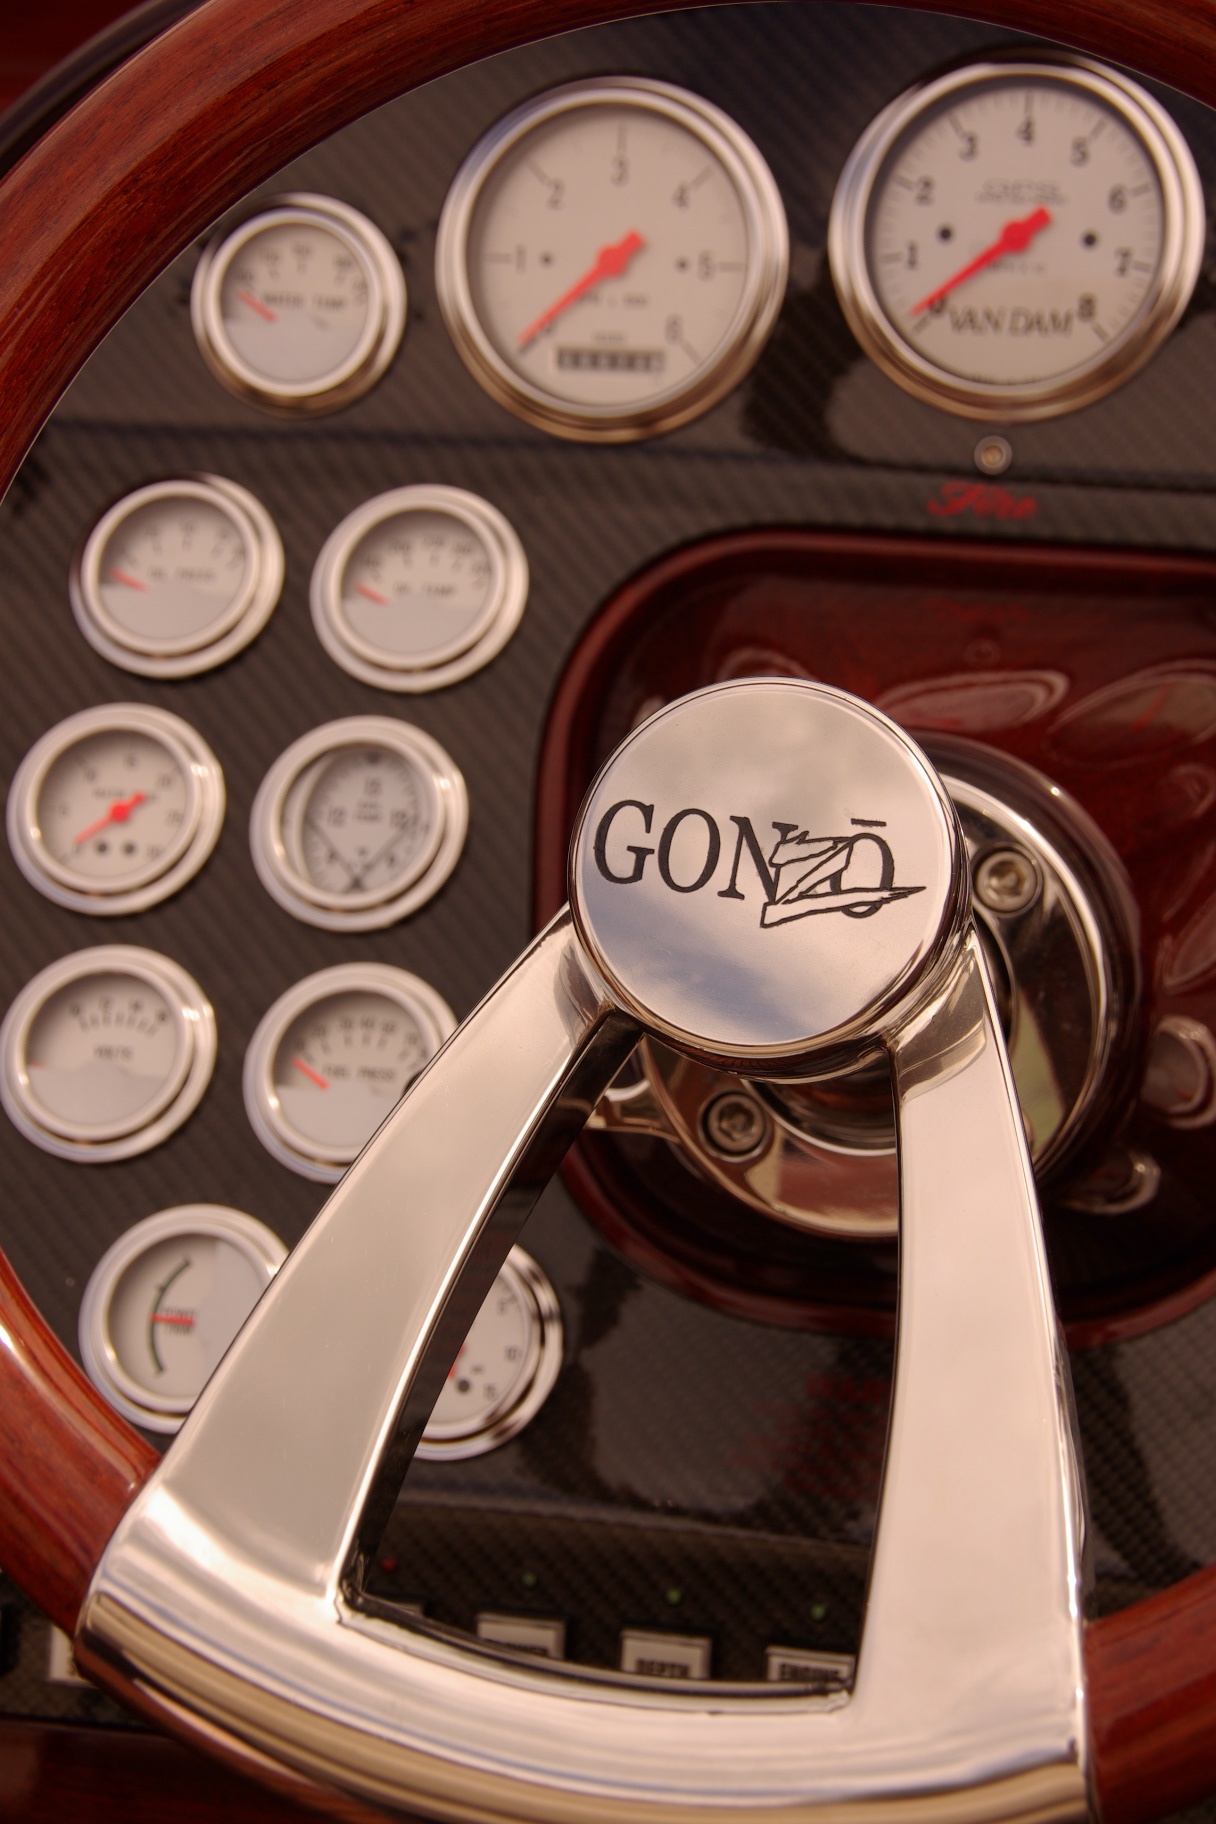 Gonzo's hand-crafted steering wheel